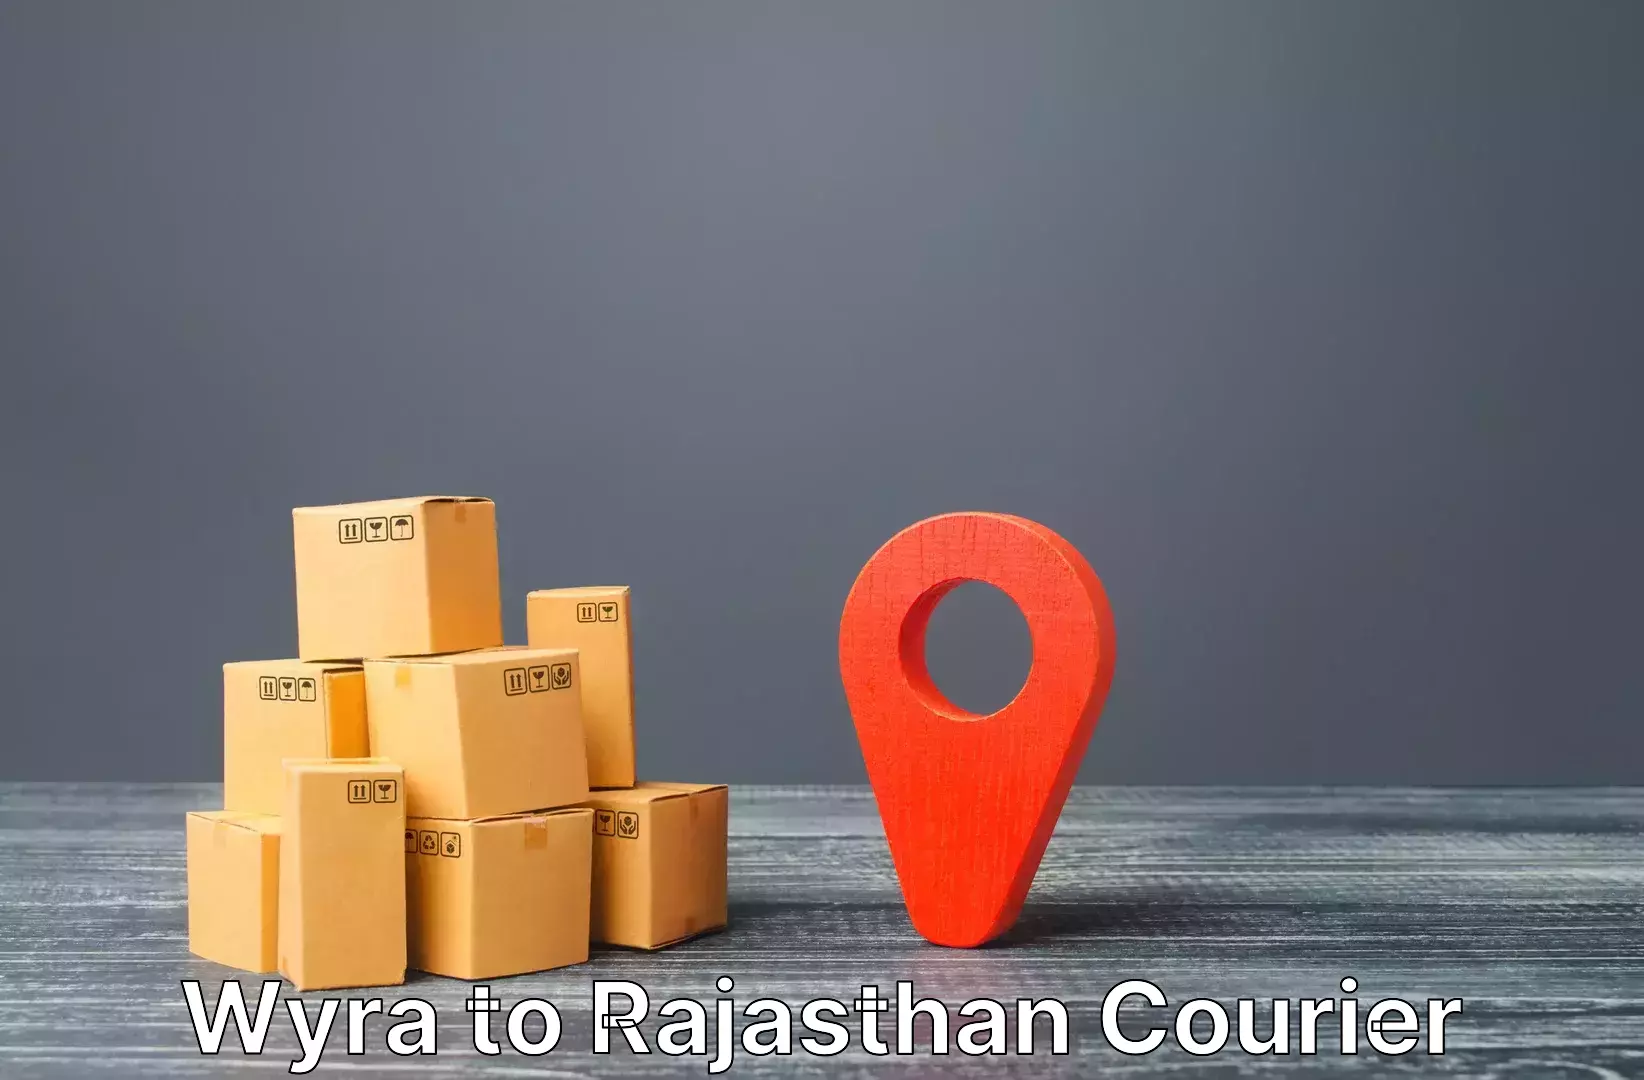 Discounted baggage transport in Wyra to Sultana